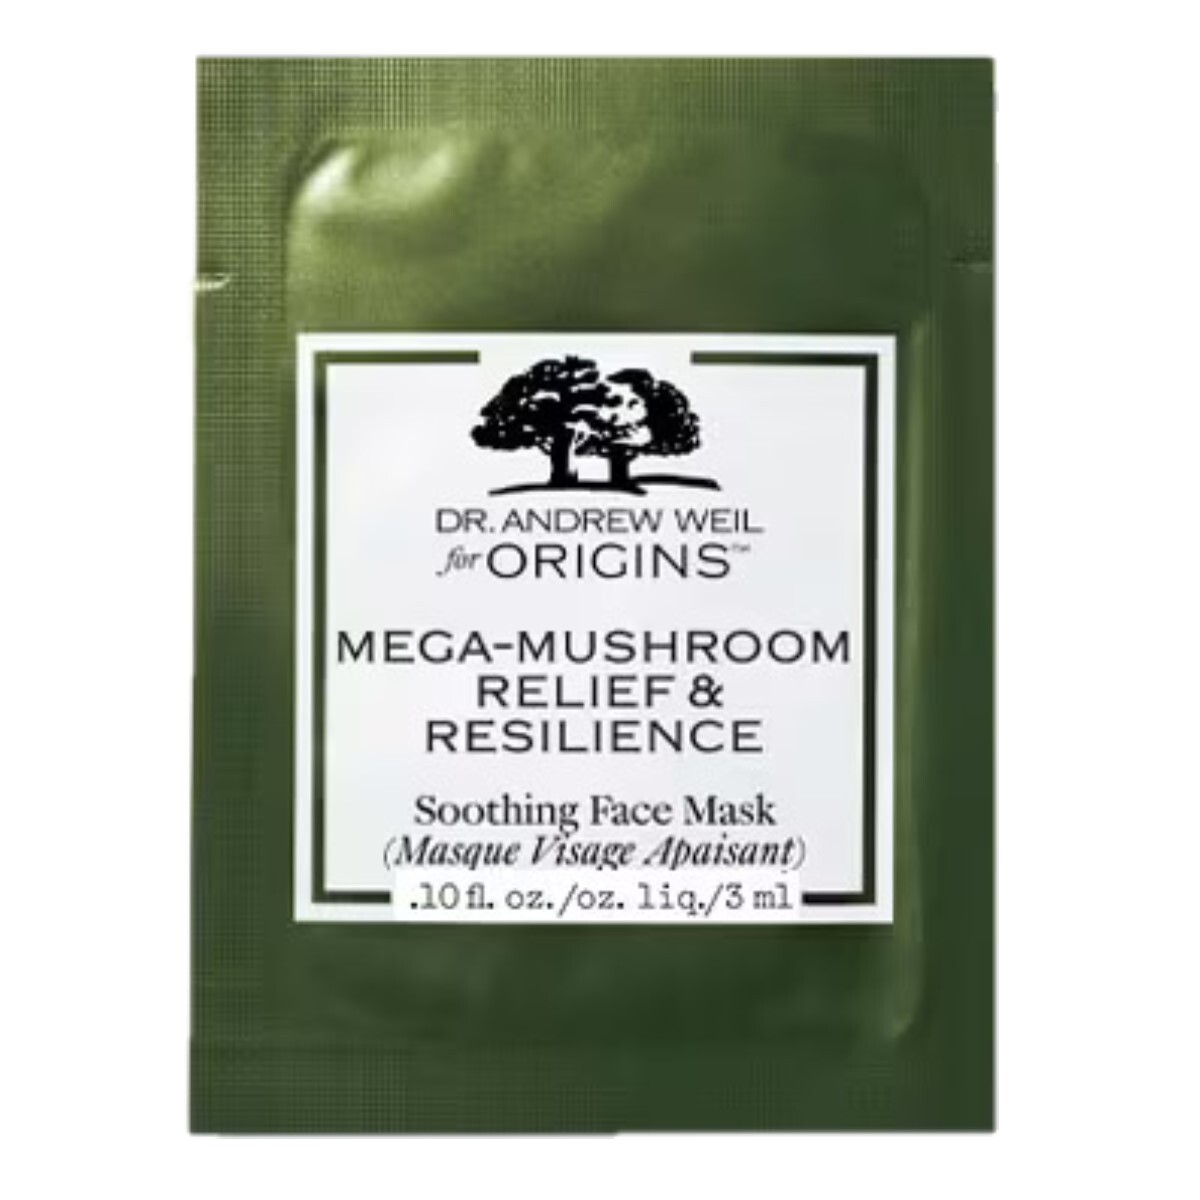 Limited Free Gift Mega-Mushroom Relief & Resilience Soothing Face Mask 3ml